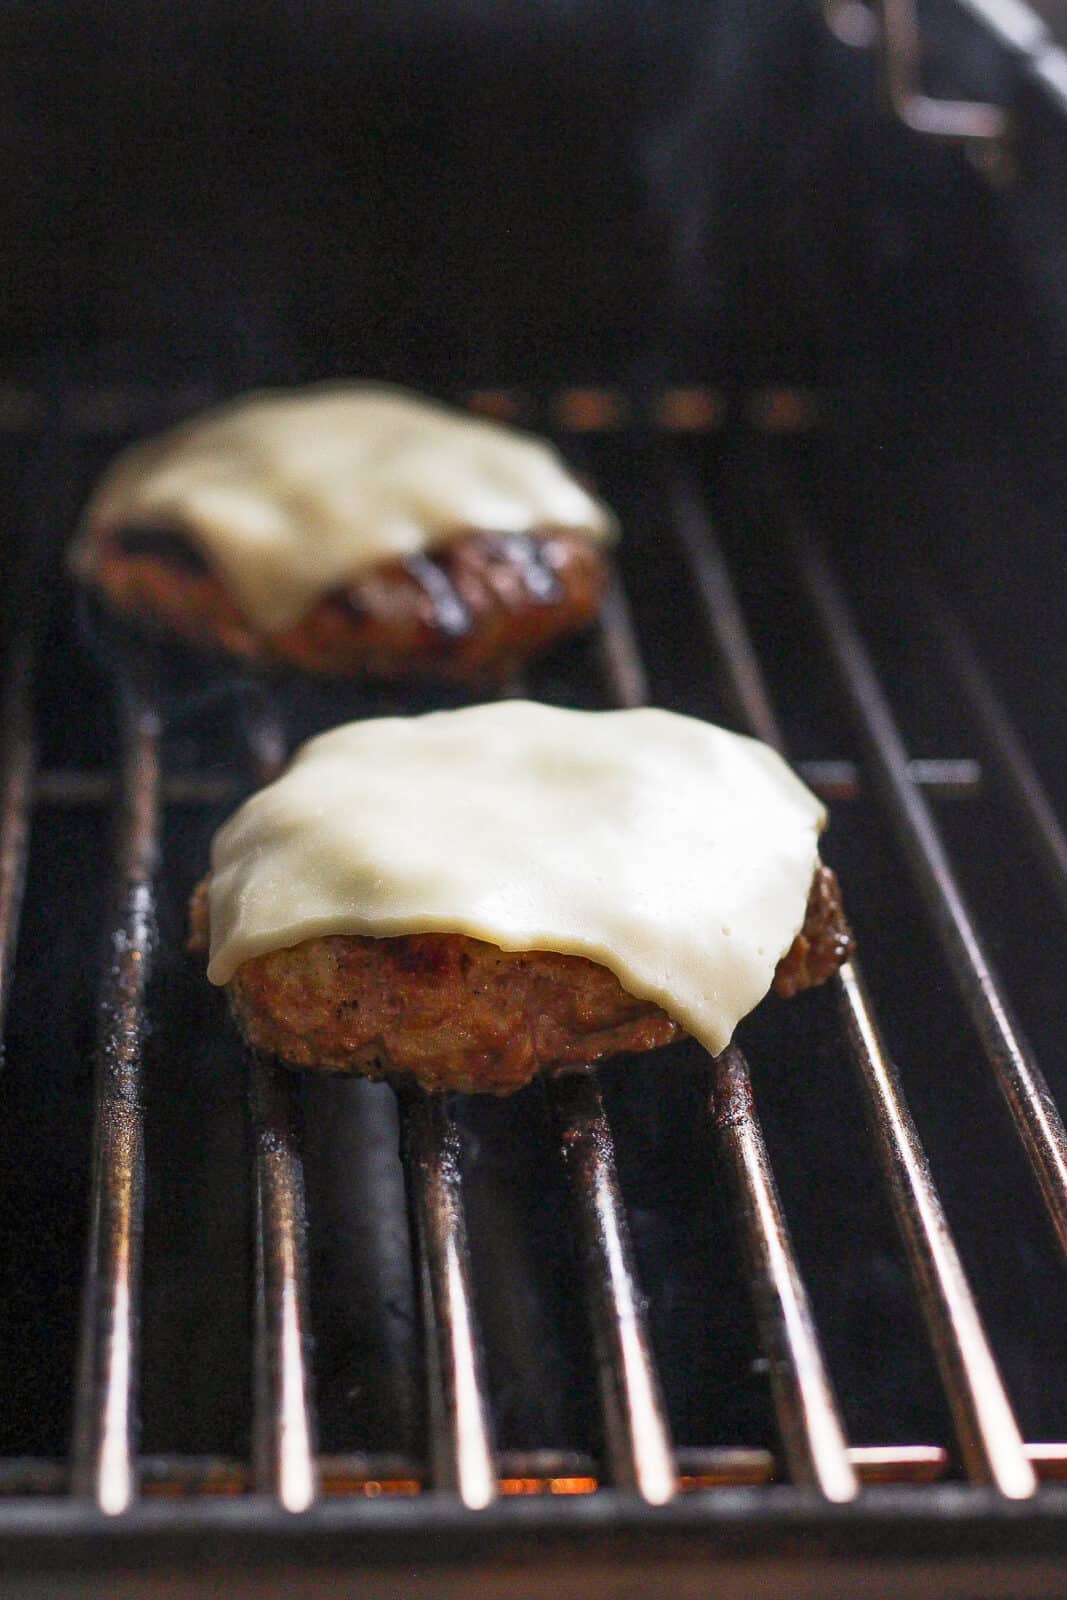 Turkey burgers on the grill with cheese on top.